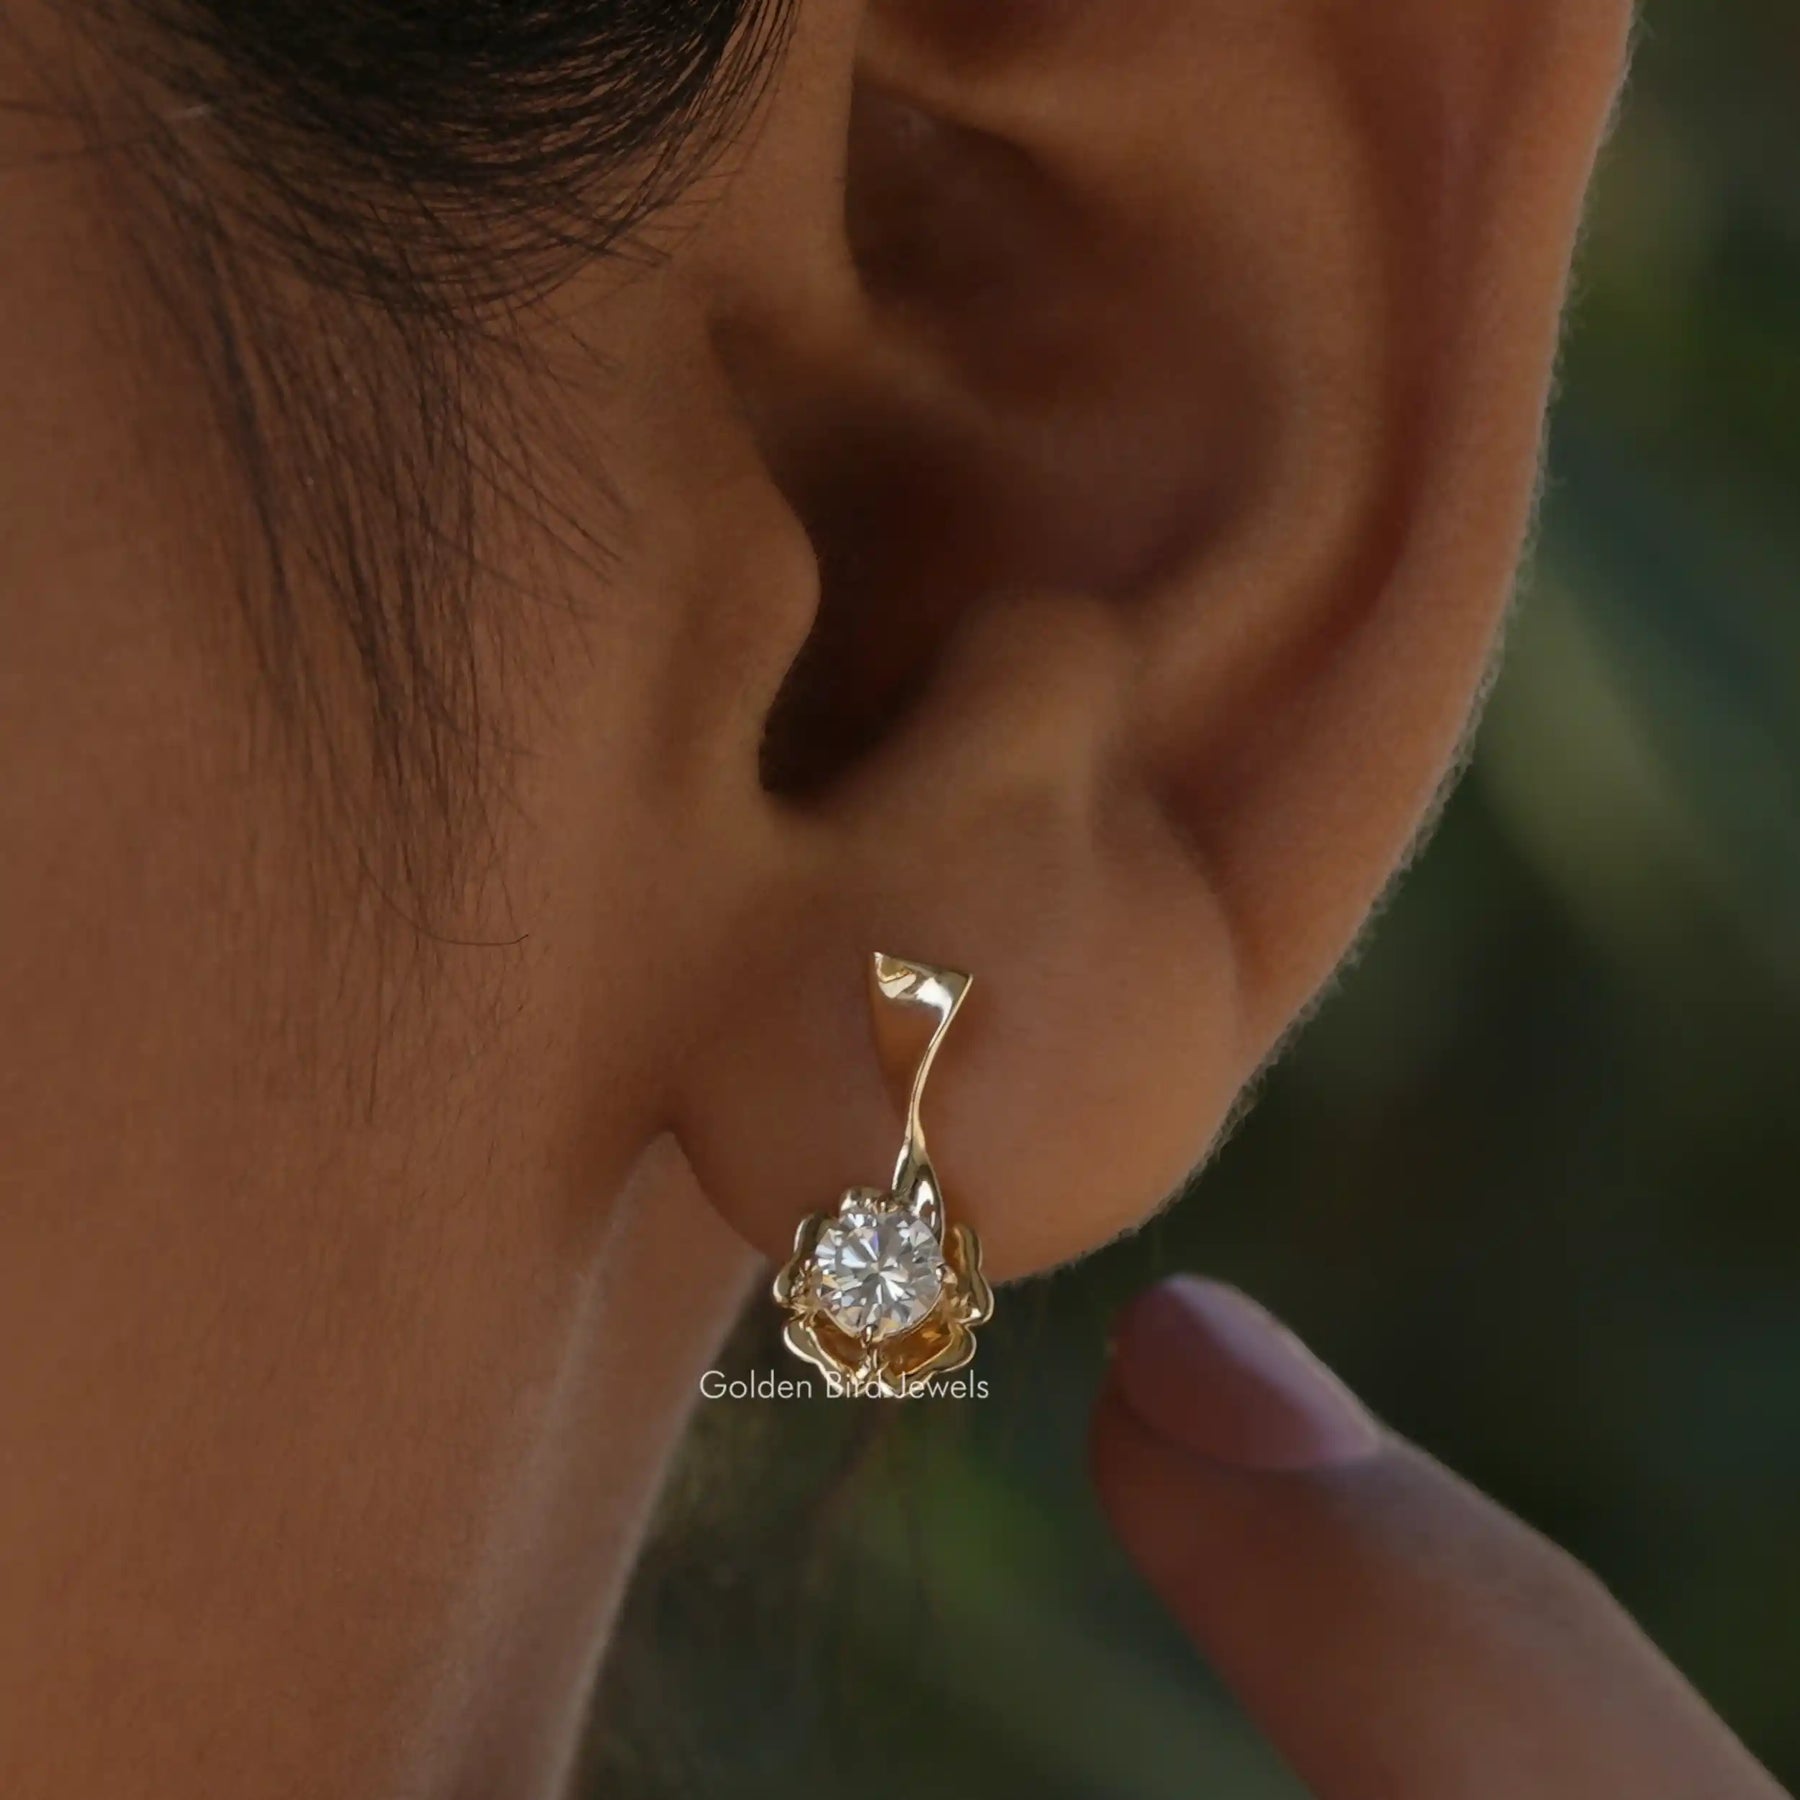 [Round cut cluster earrings made of prong setting]-[Golden Bird Jewels]